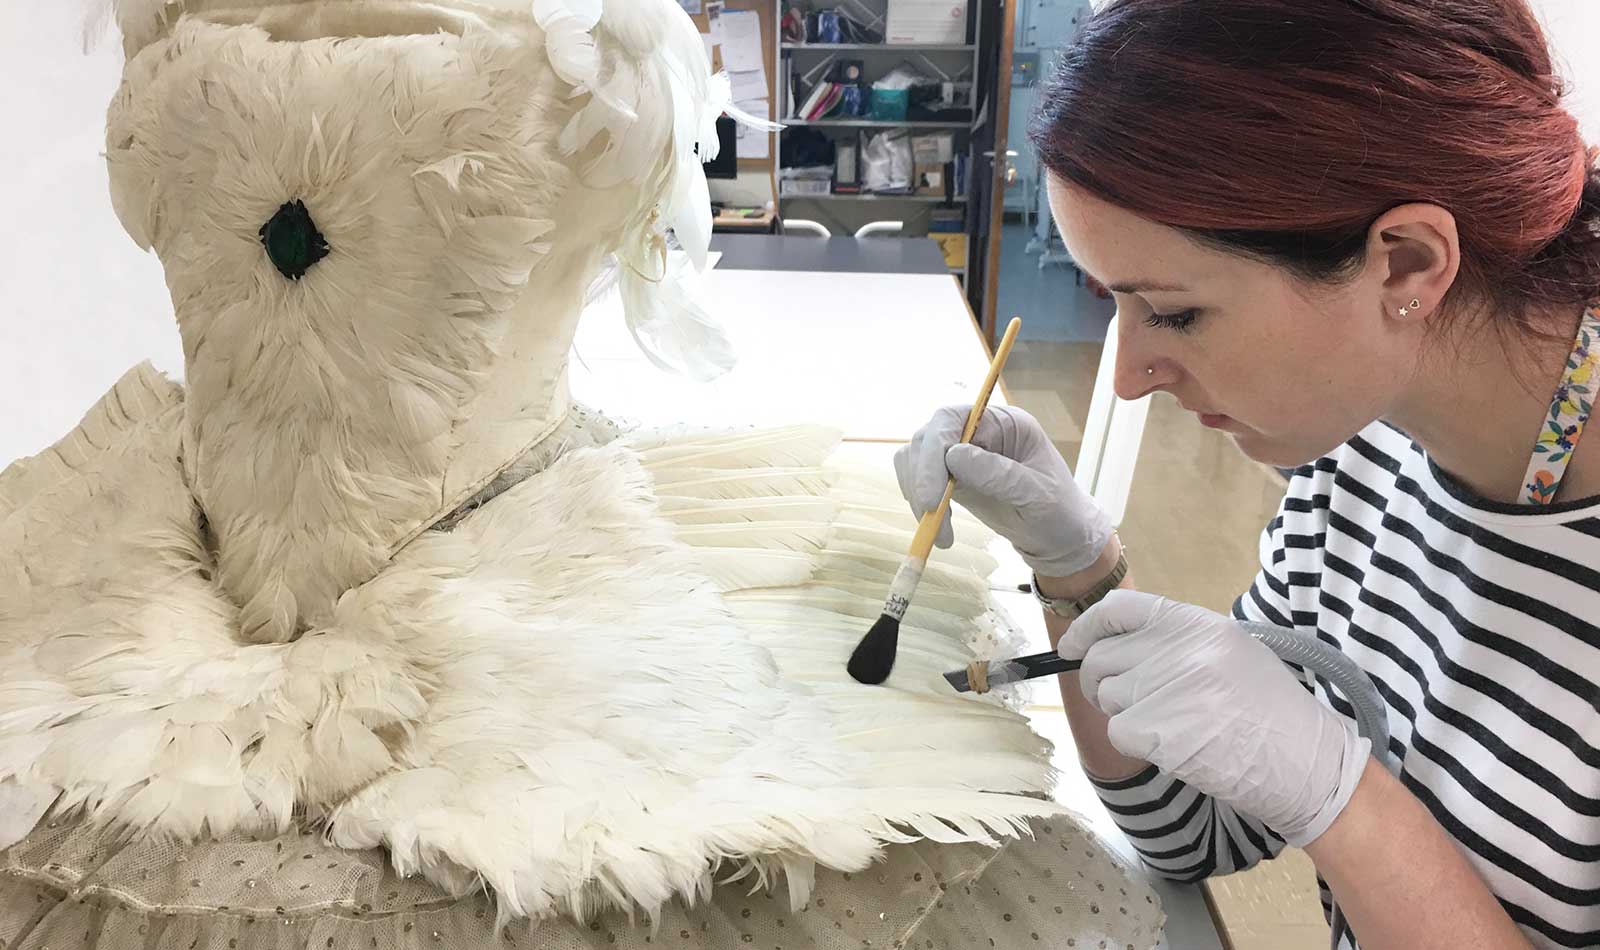 Surface cleaning feathers using a low suction vacuum and soft brush.